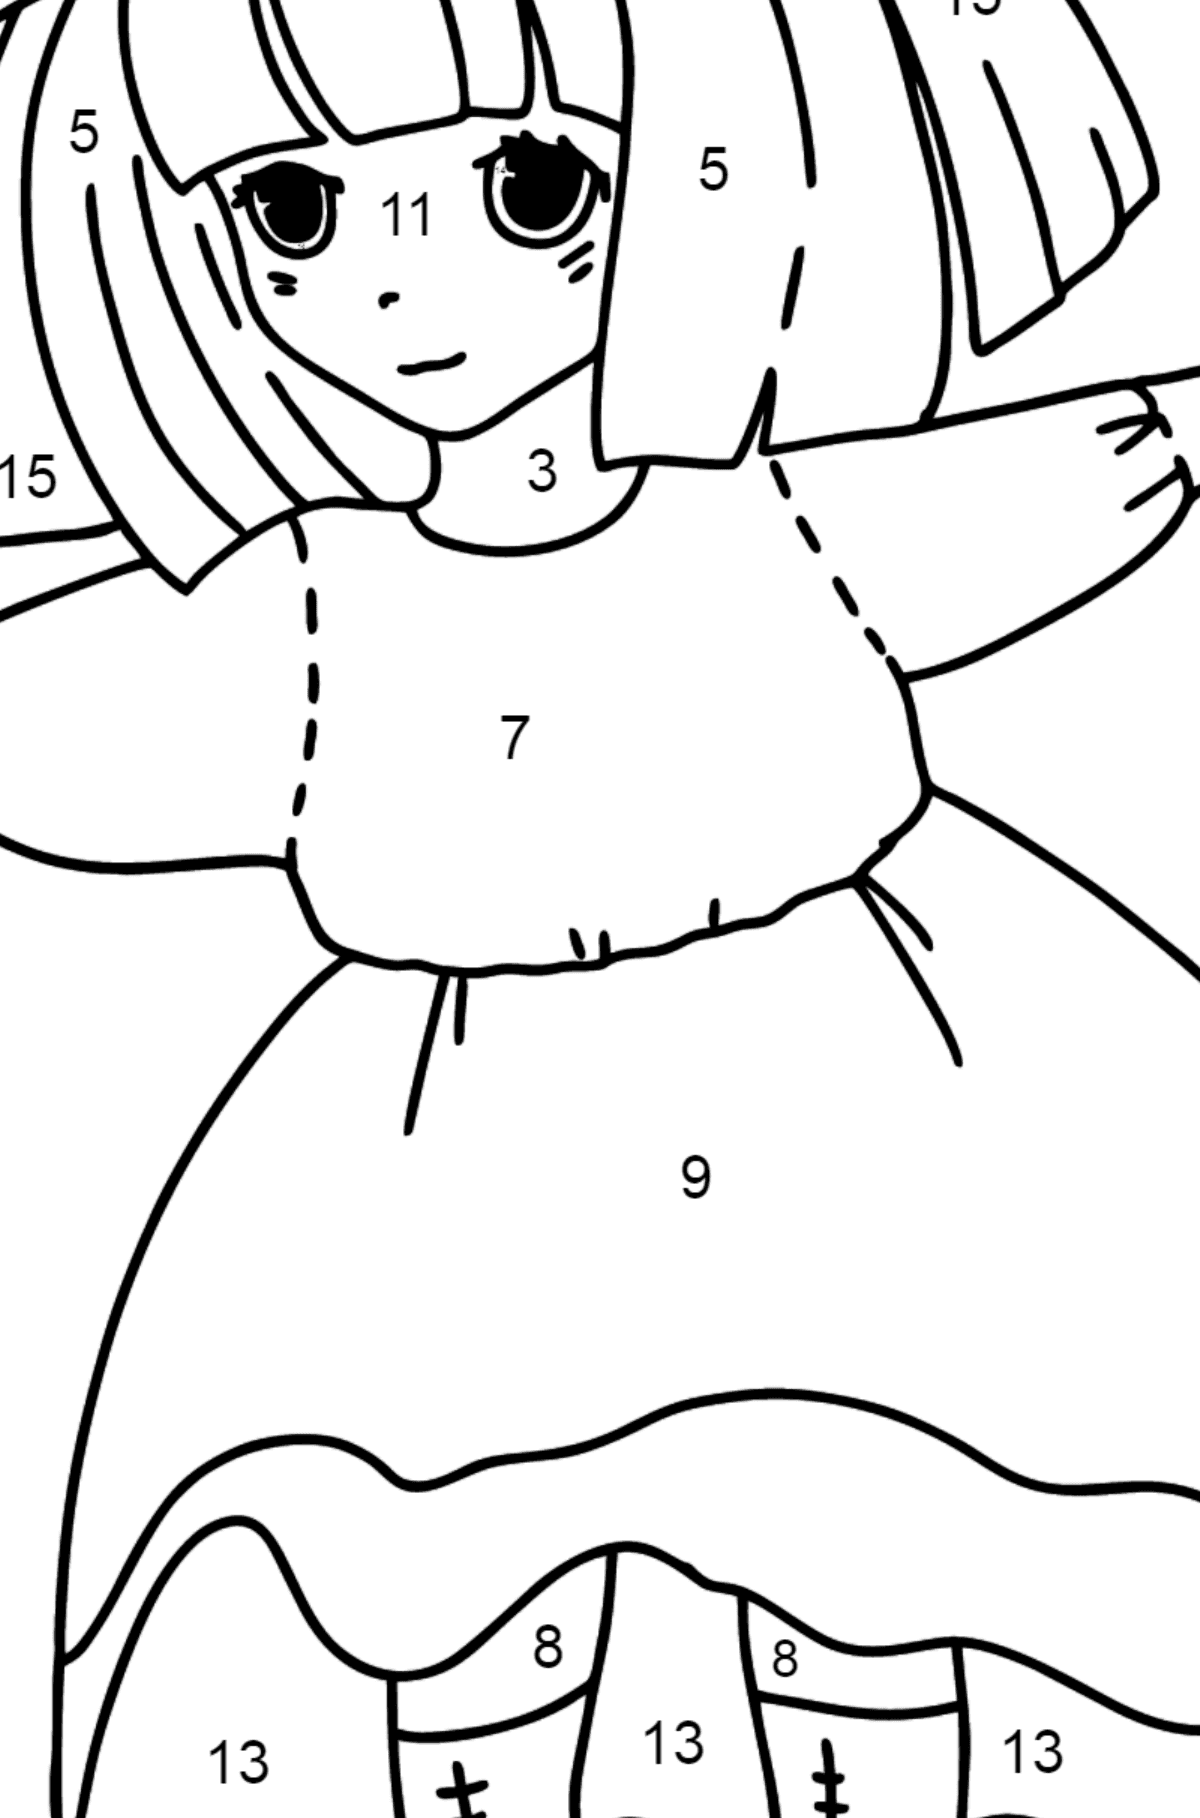 Anime Girl Dancing coloring page - Coloring by Numbers for Kids